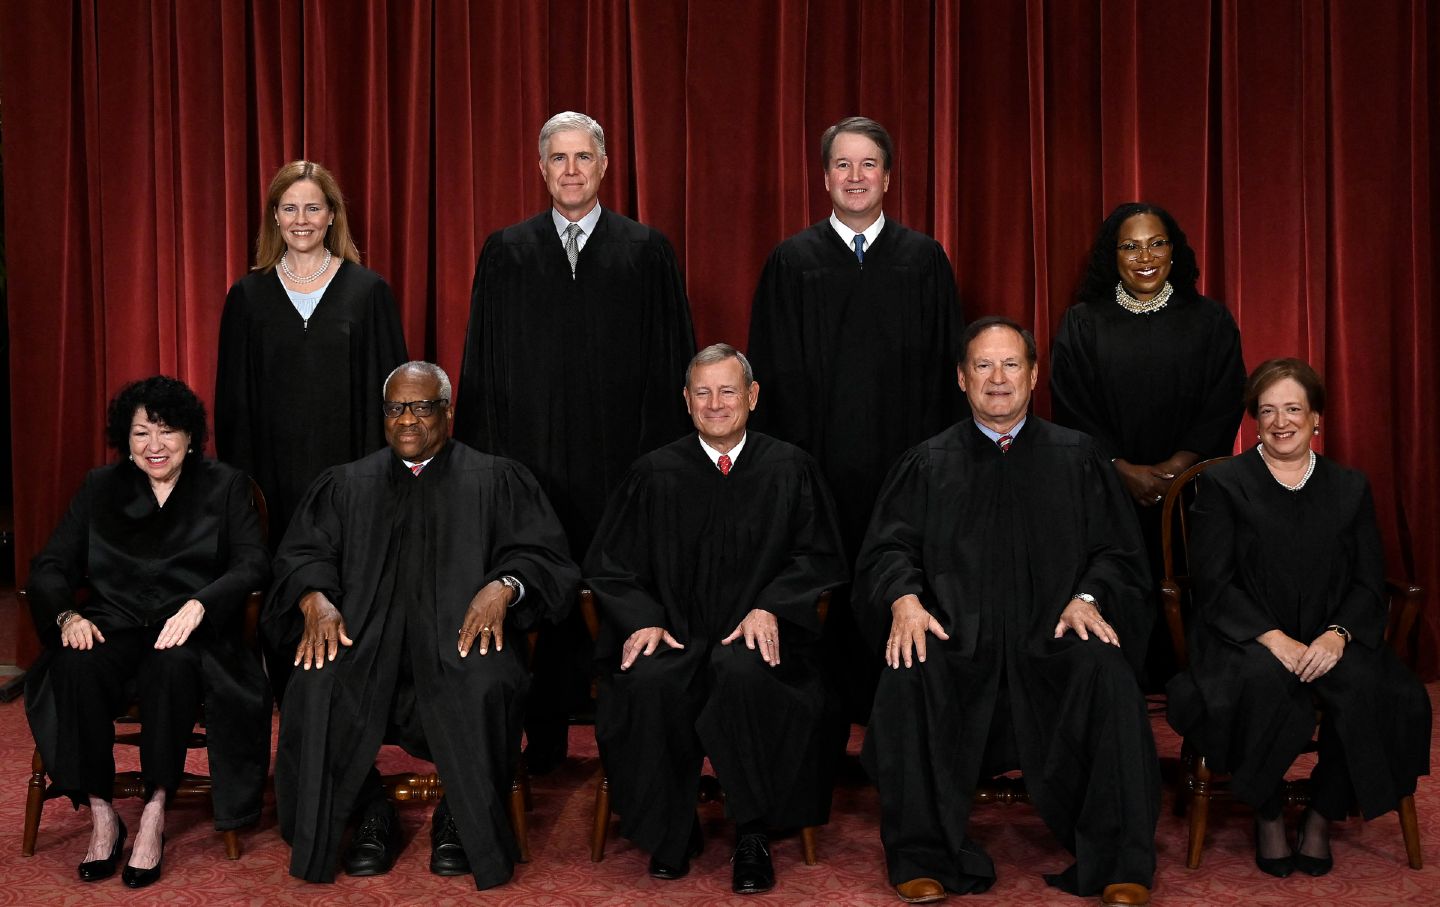 Justices of the US Supreme Court pose for their official photo at the Supreme Court Building in Washington, D.C., on October 7, 2022.